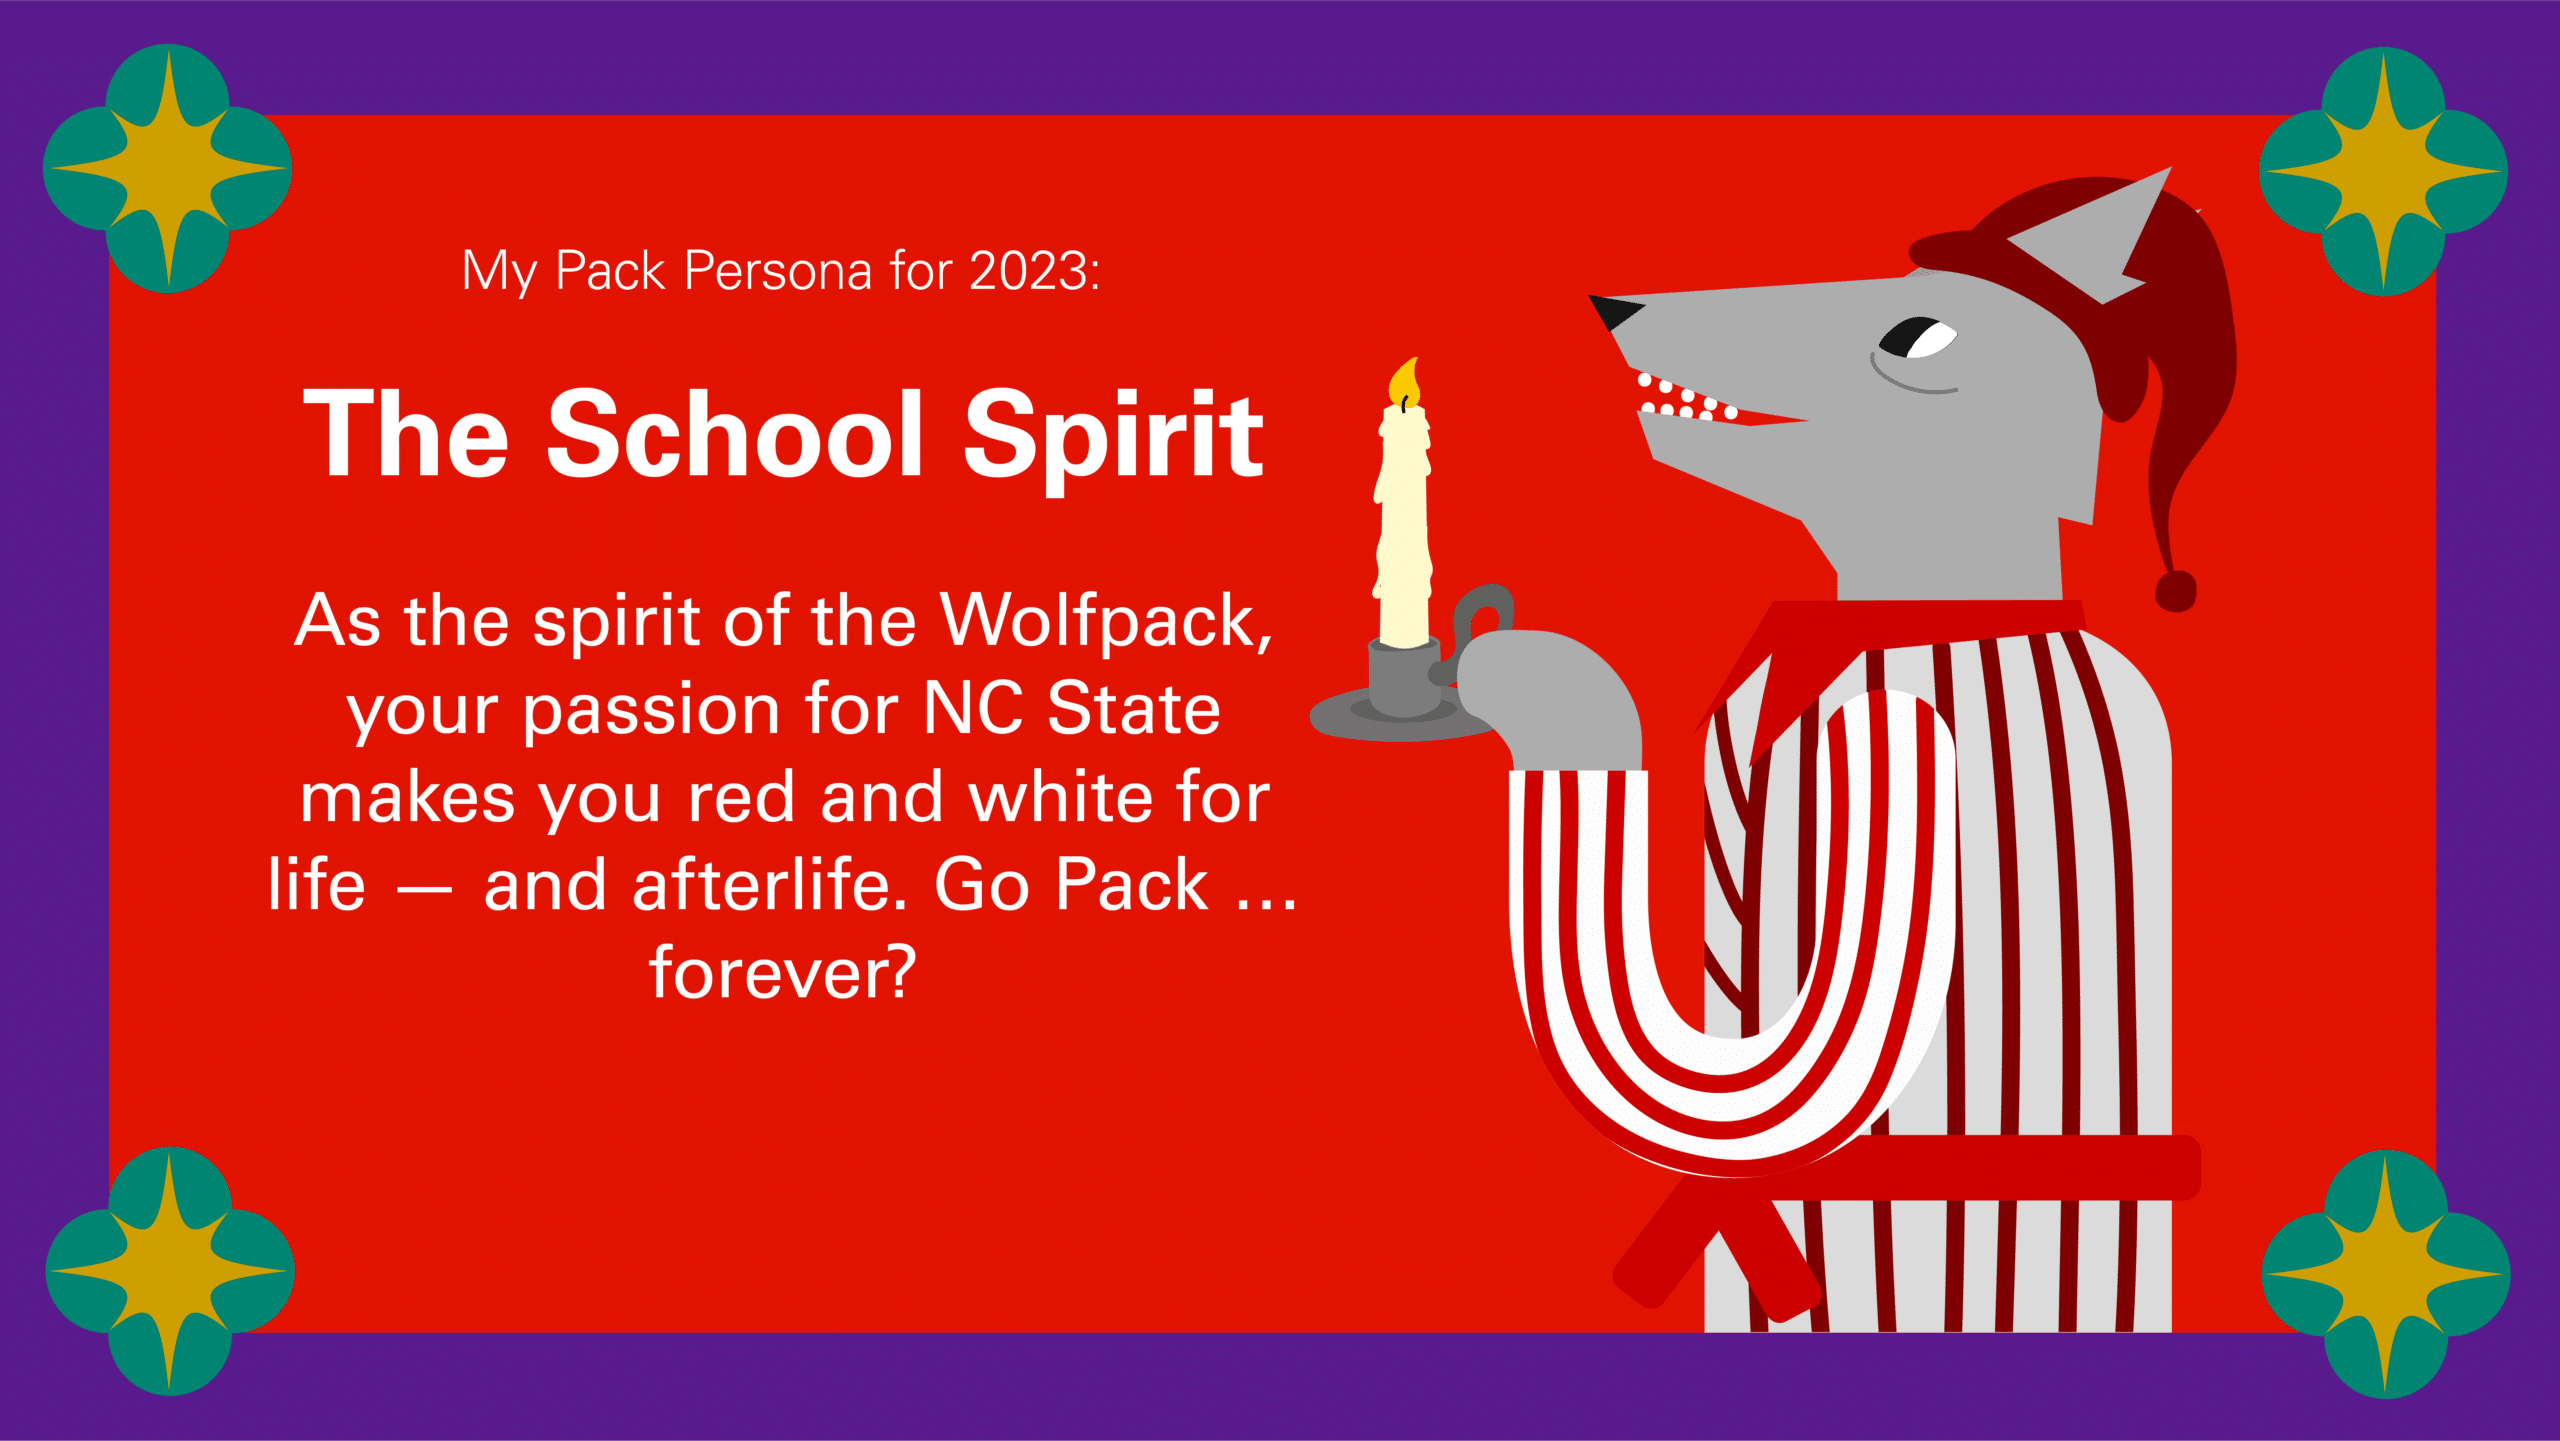 The School Spirit: As the spirit of the Wolfpack, your passion for NC State makes you red and white for life — and afterlife. Go Pack … forever?